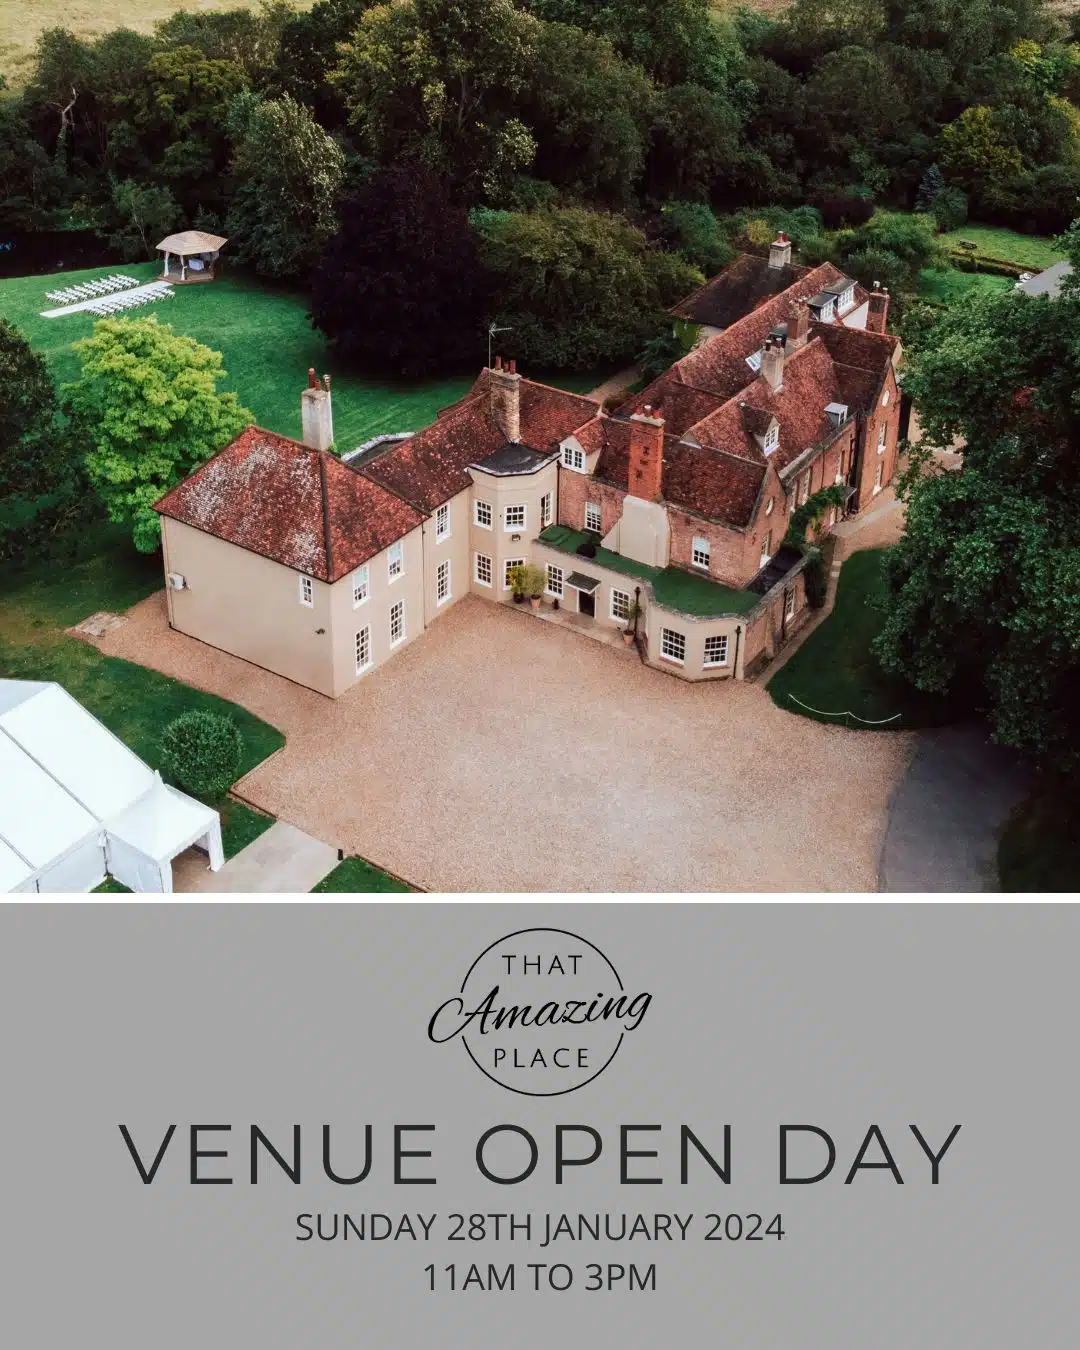 Wedding venue open day at that amazing place wedding and events venue old harlow essex